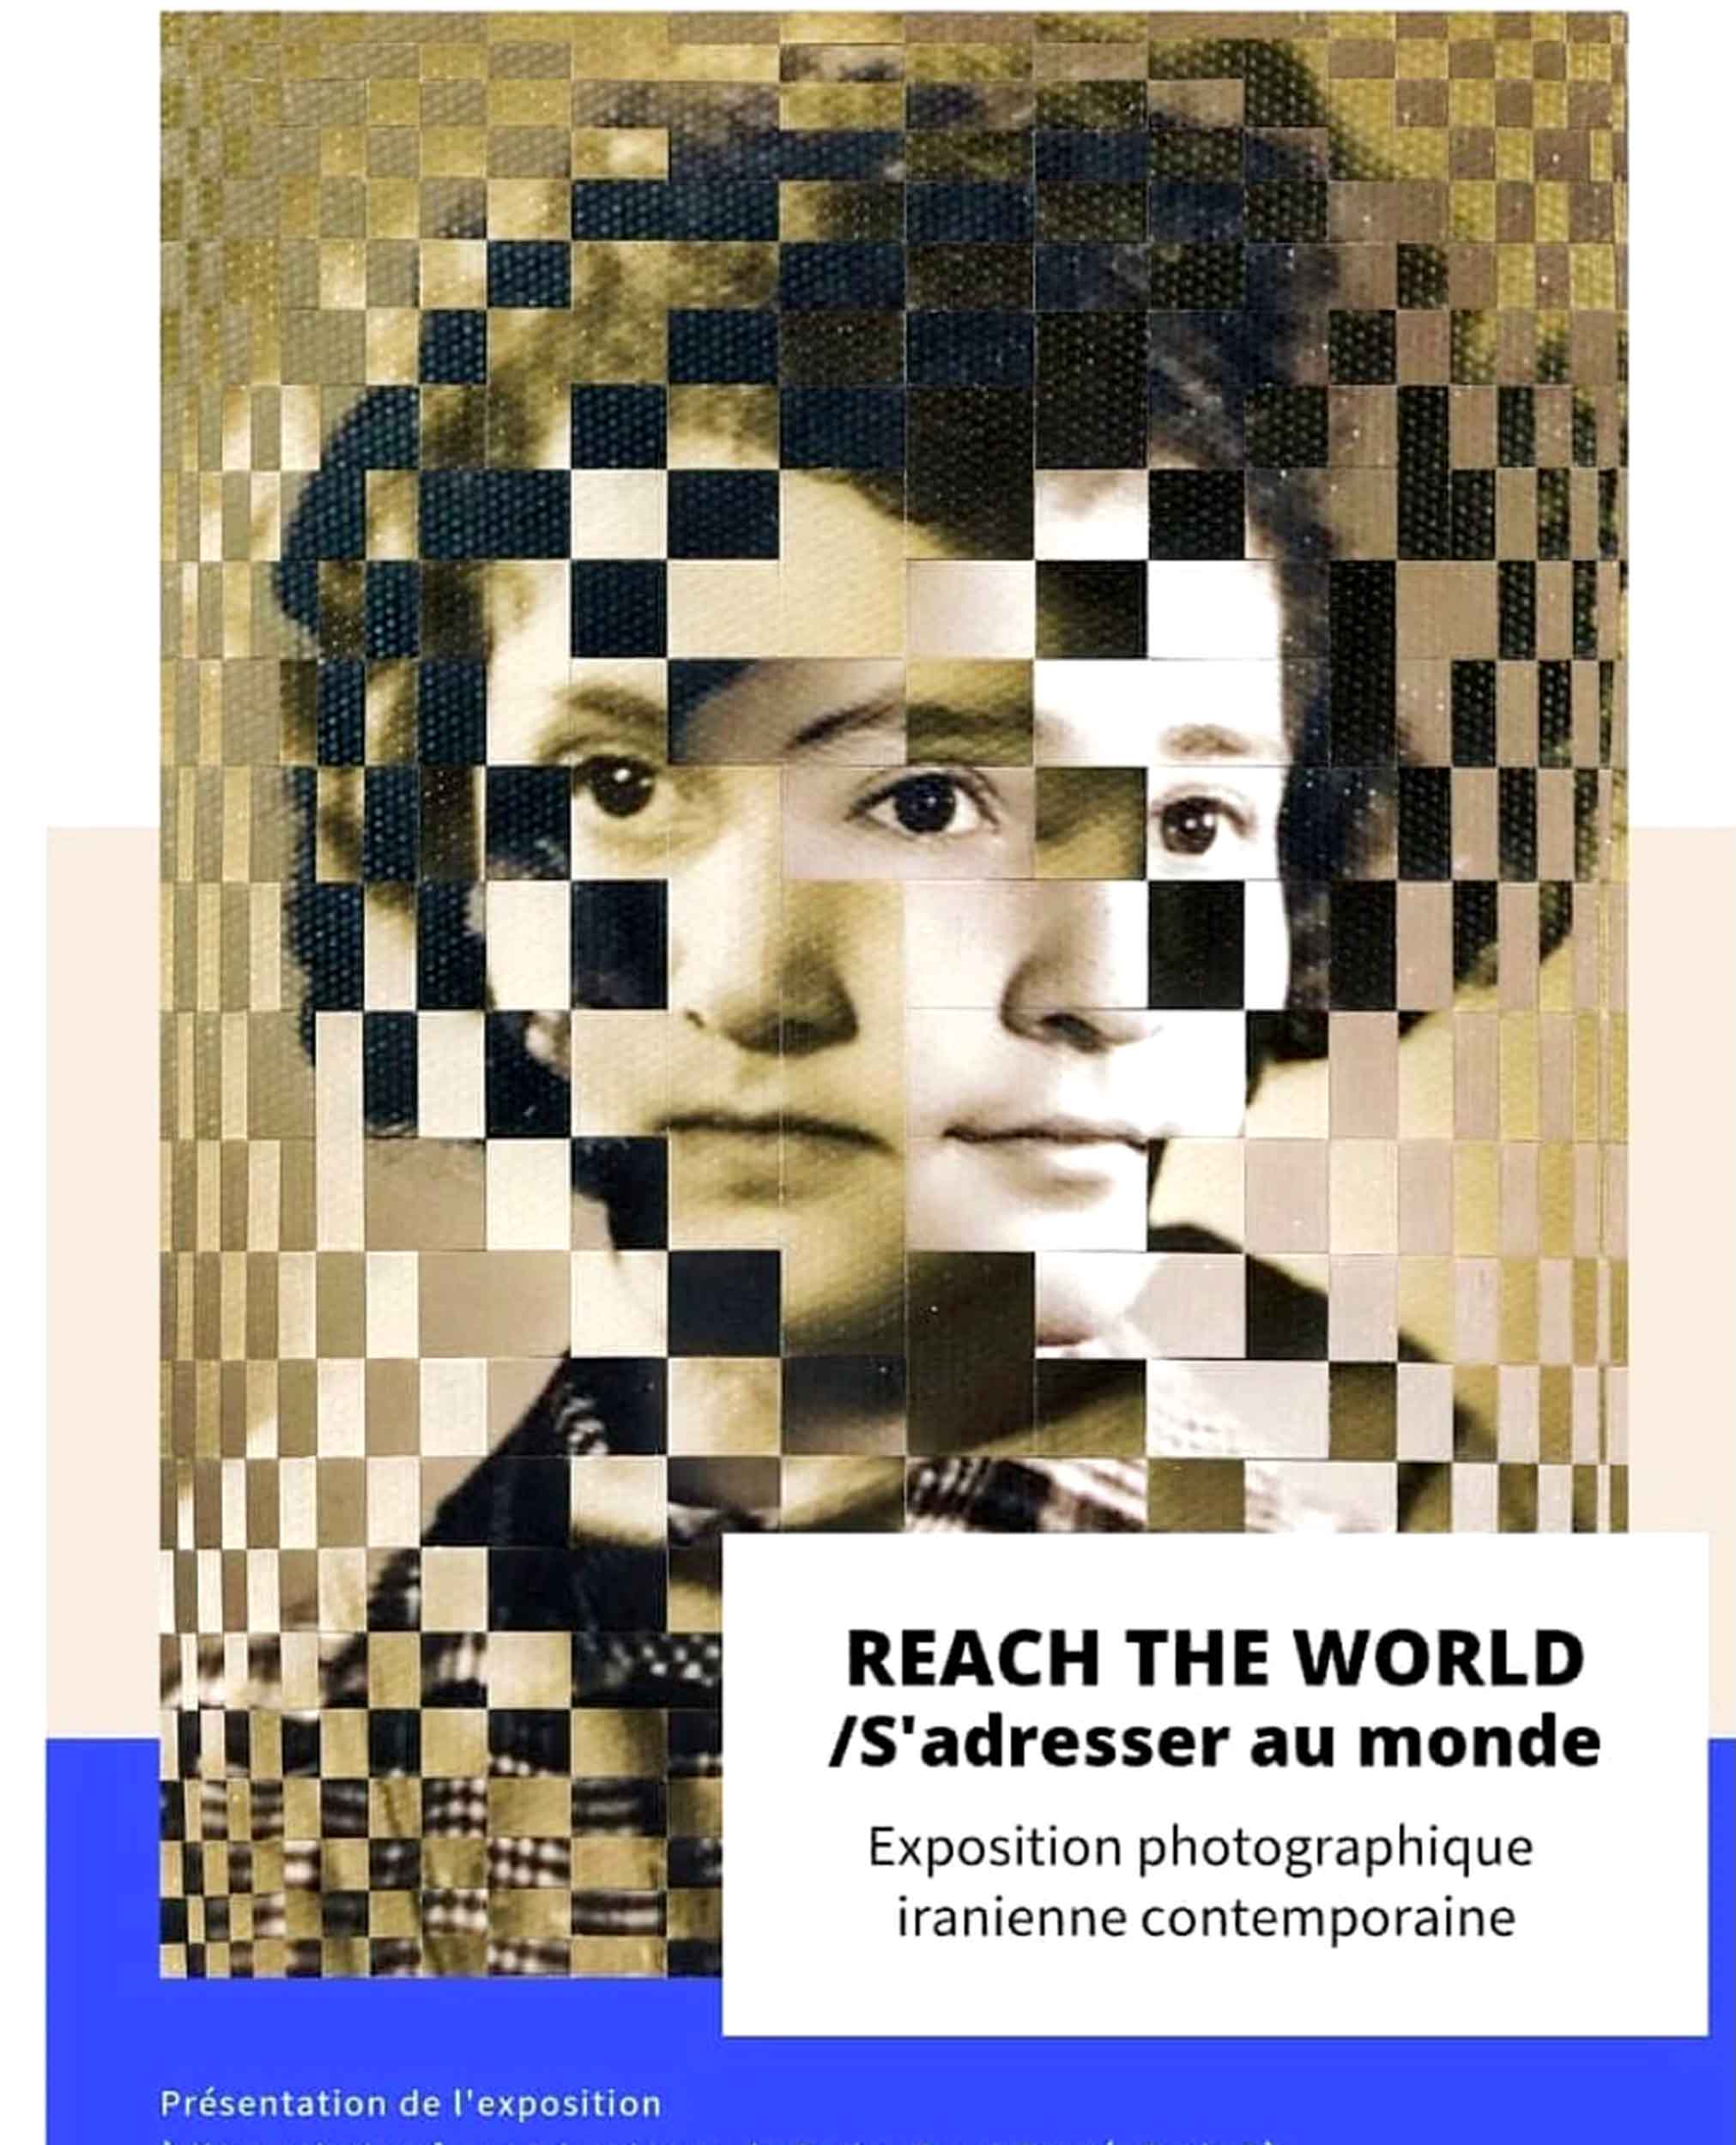 Reach the world, an itinerante exhibition of contemporary art on iranian creation.